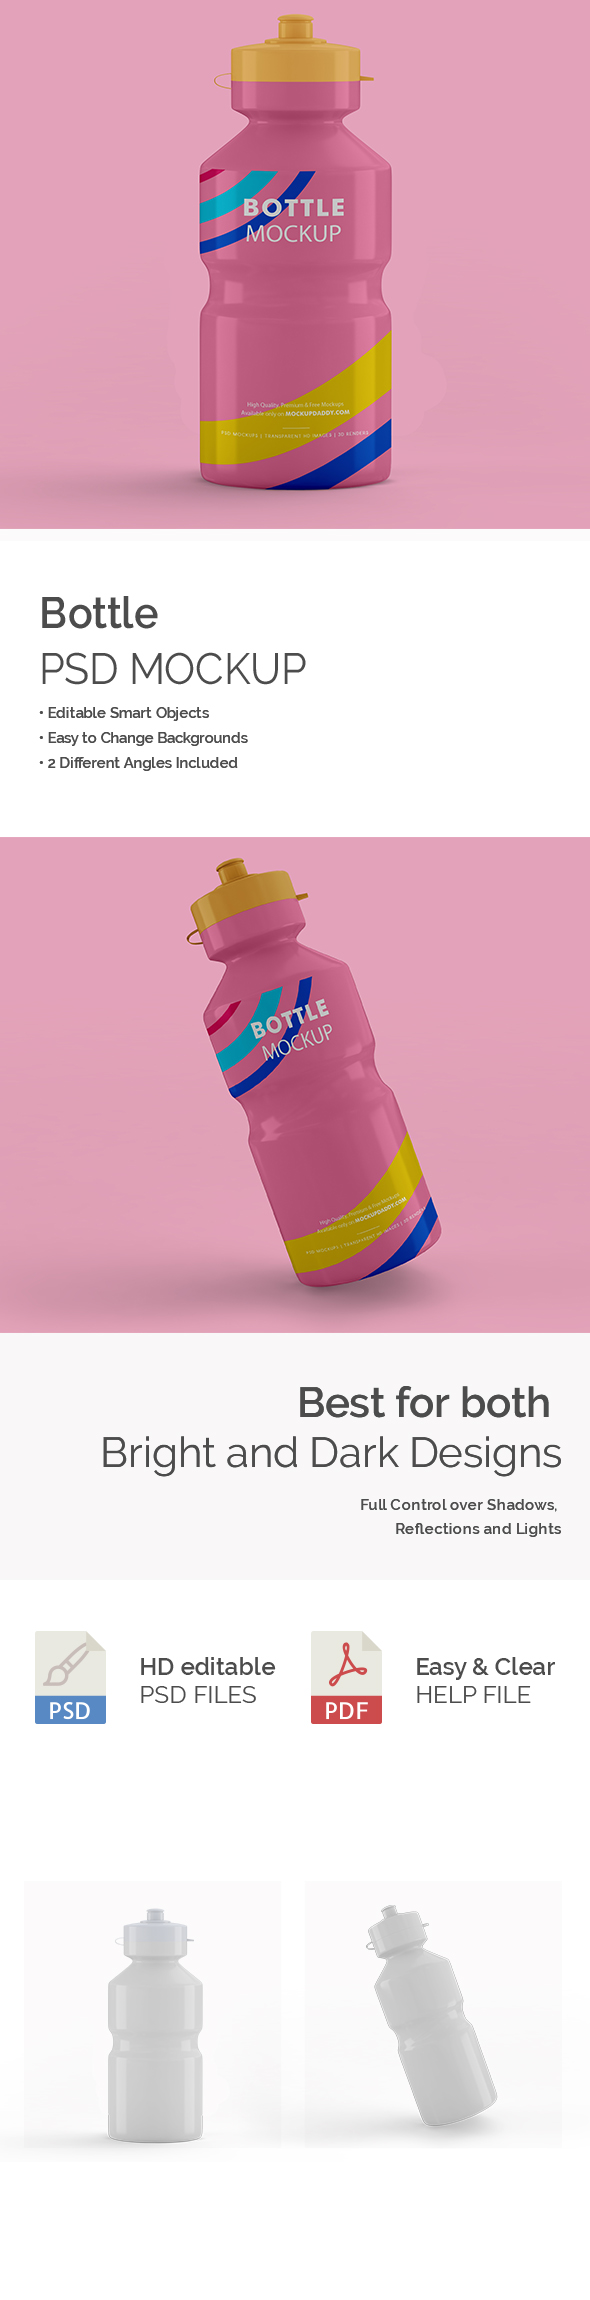 Customizable Sports Plastic Water Bottle Mockup in pink color with yellow cap